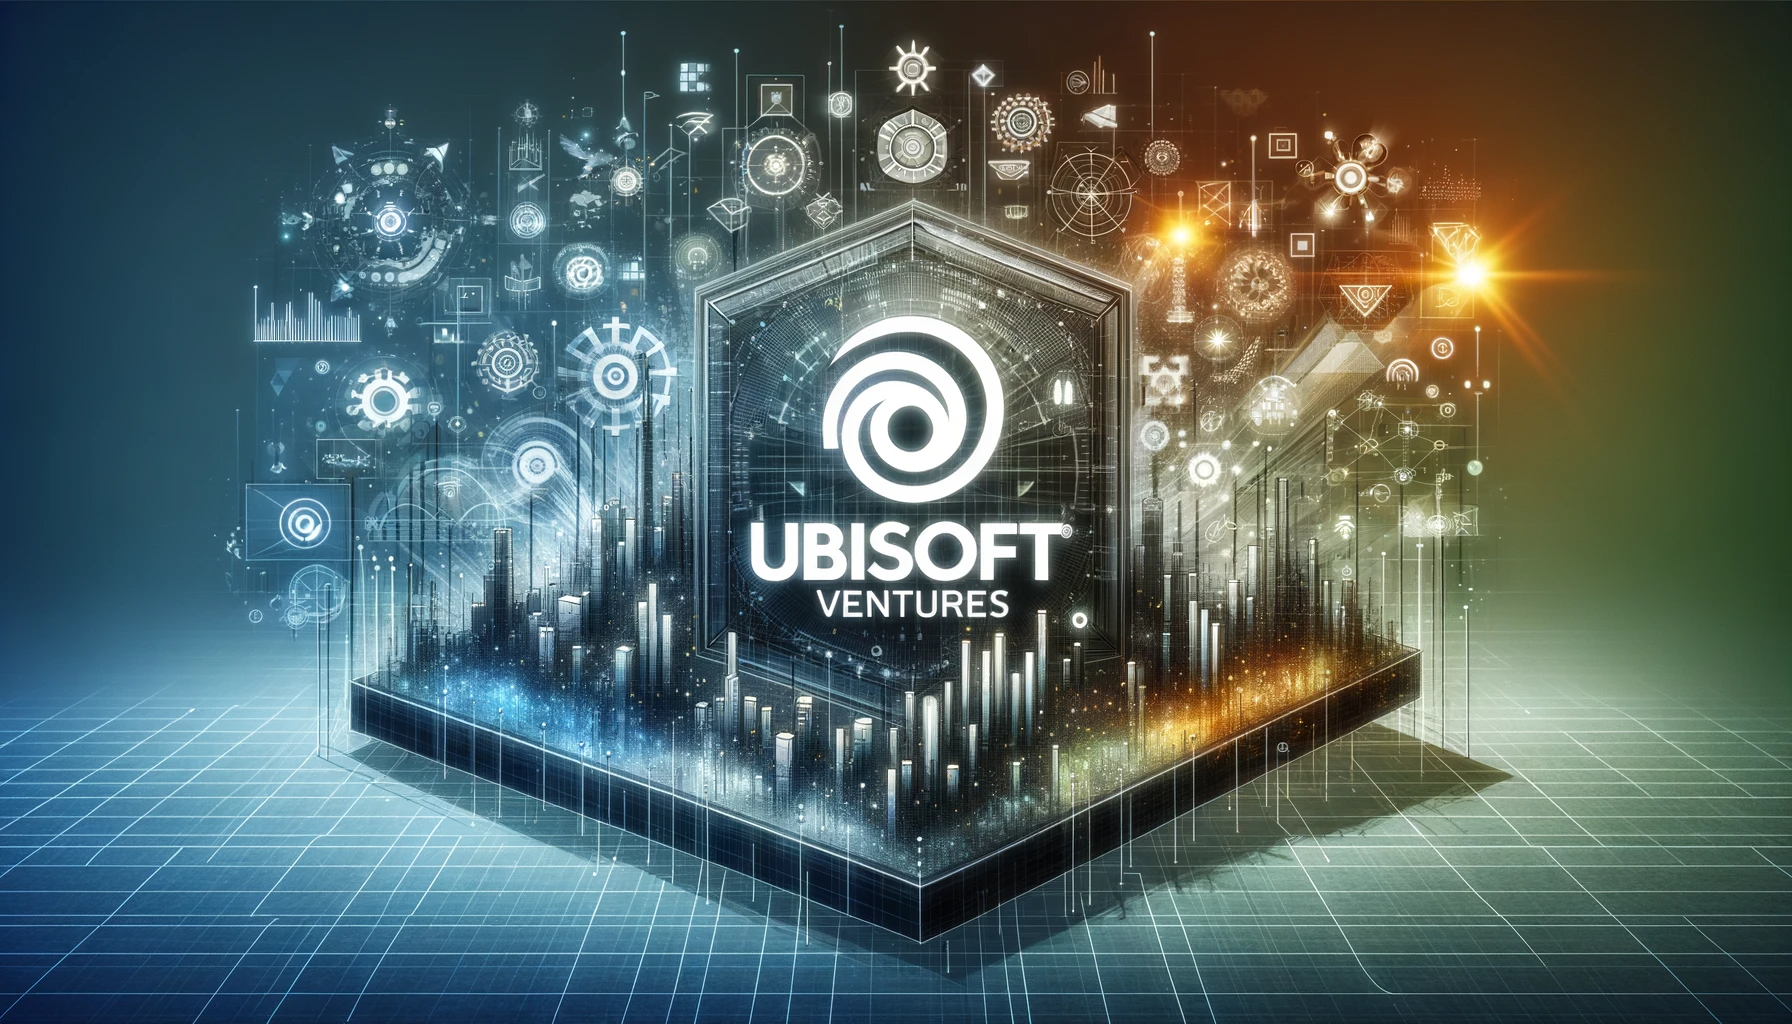 Ubisoft: Innovations and Development in the World of Video Games - news